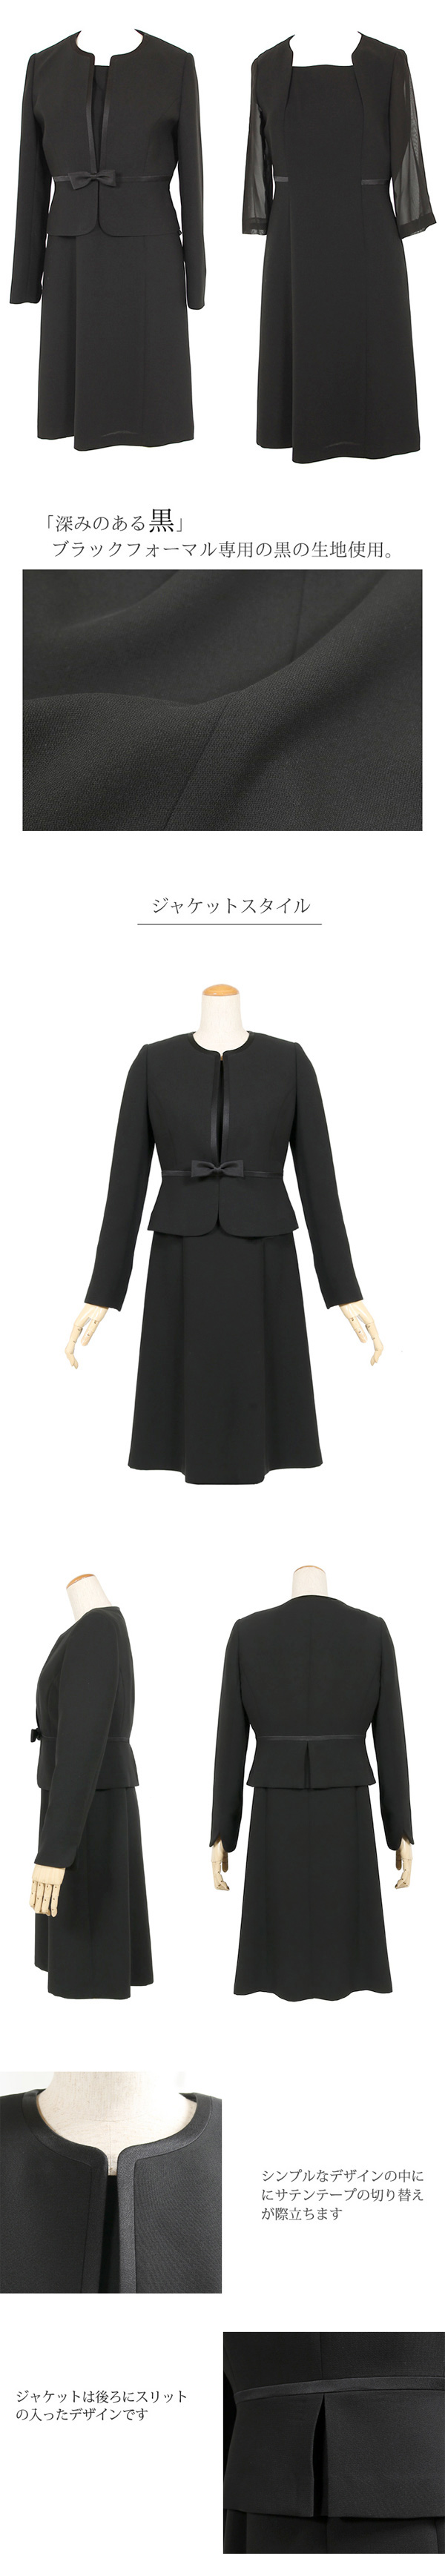  mourning dress black formal . clothes lady's 